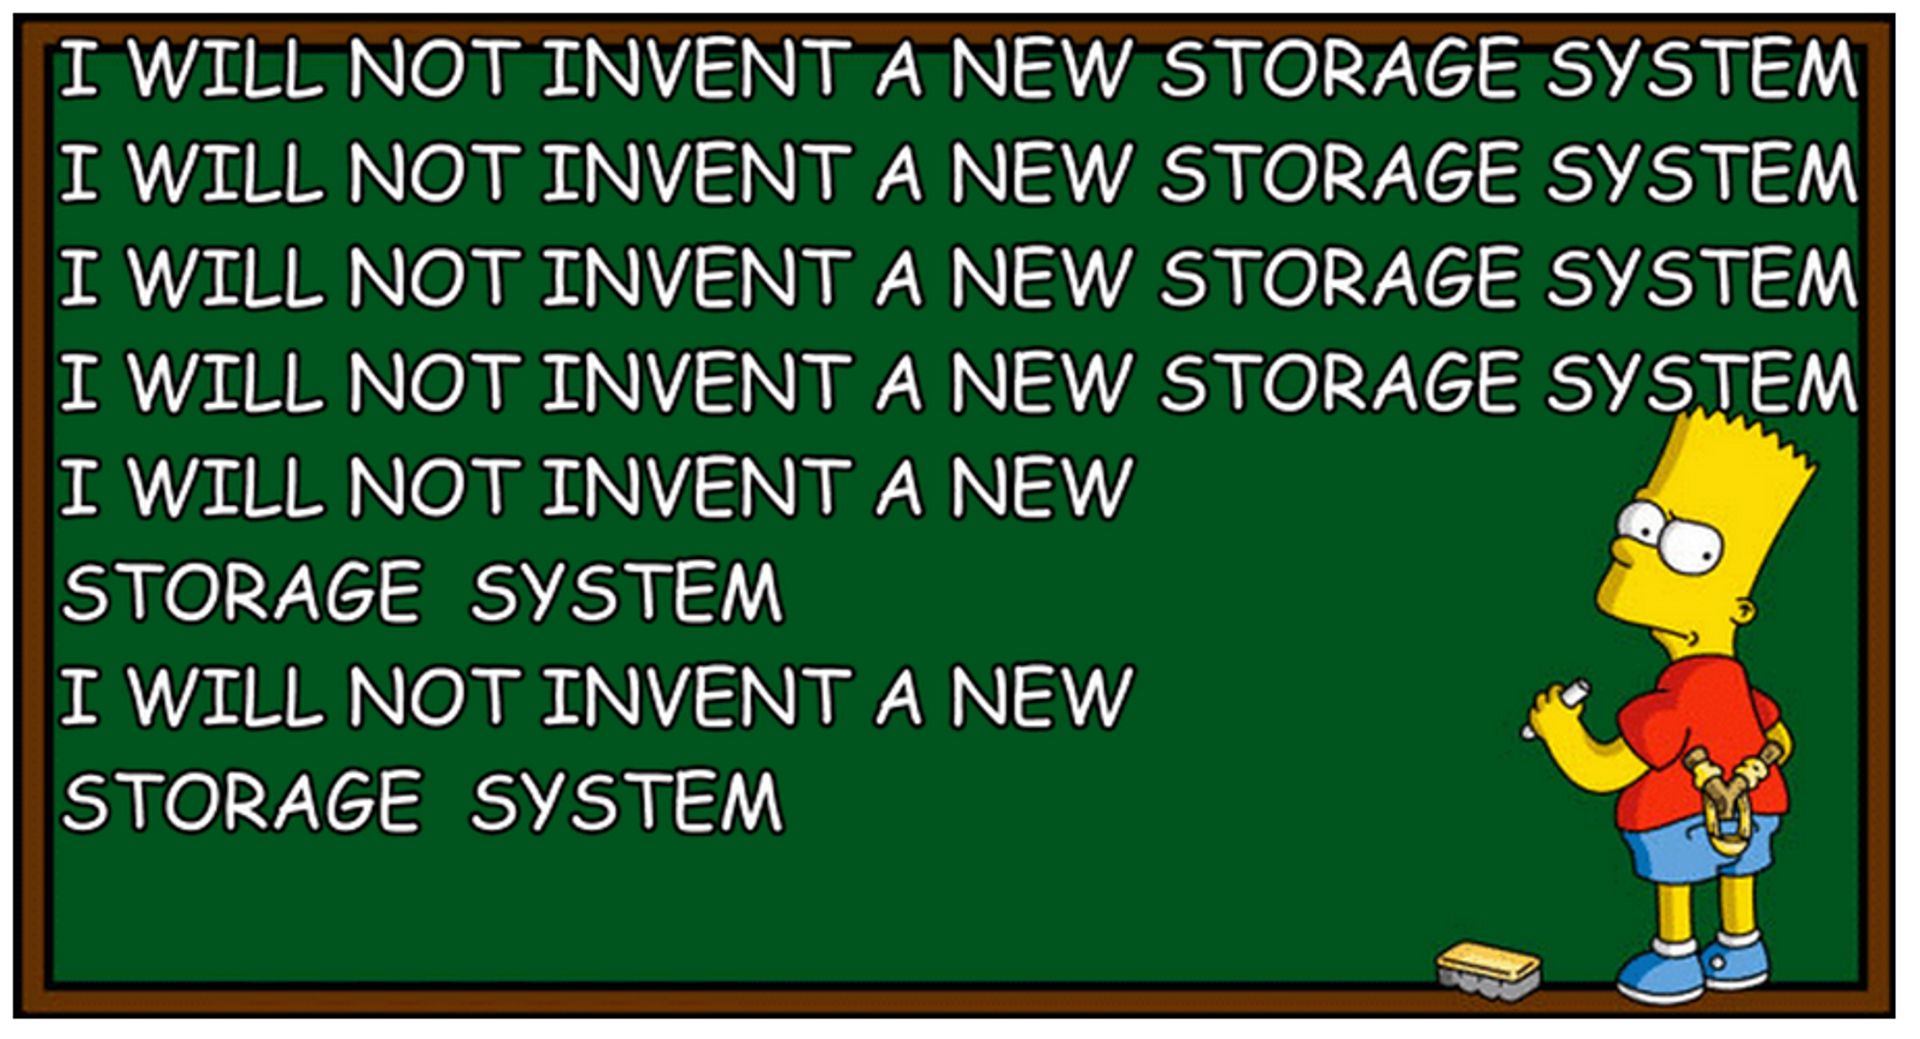 Bart system writing on blackboard: I will not invent a new storage system